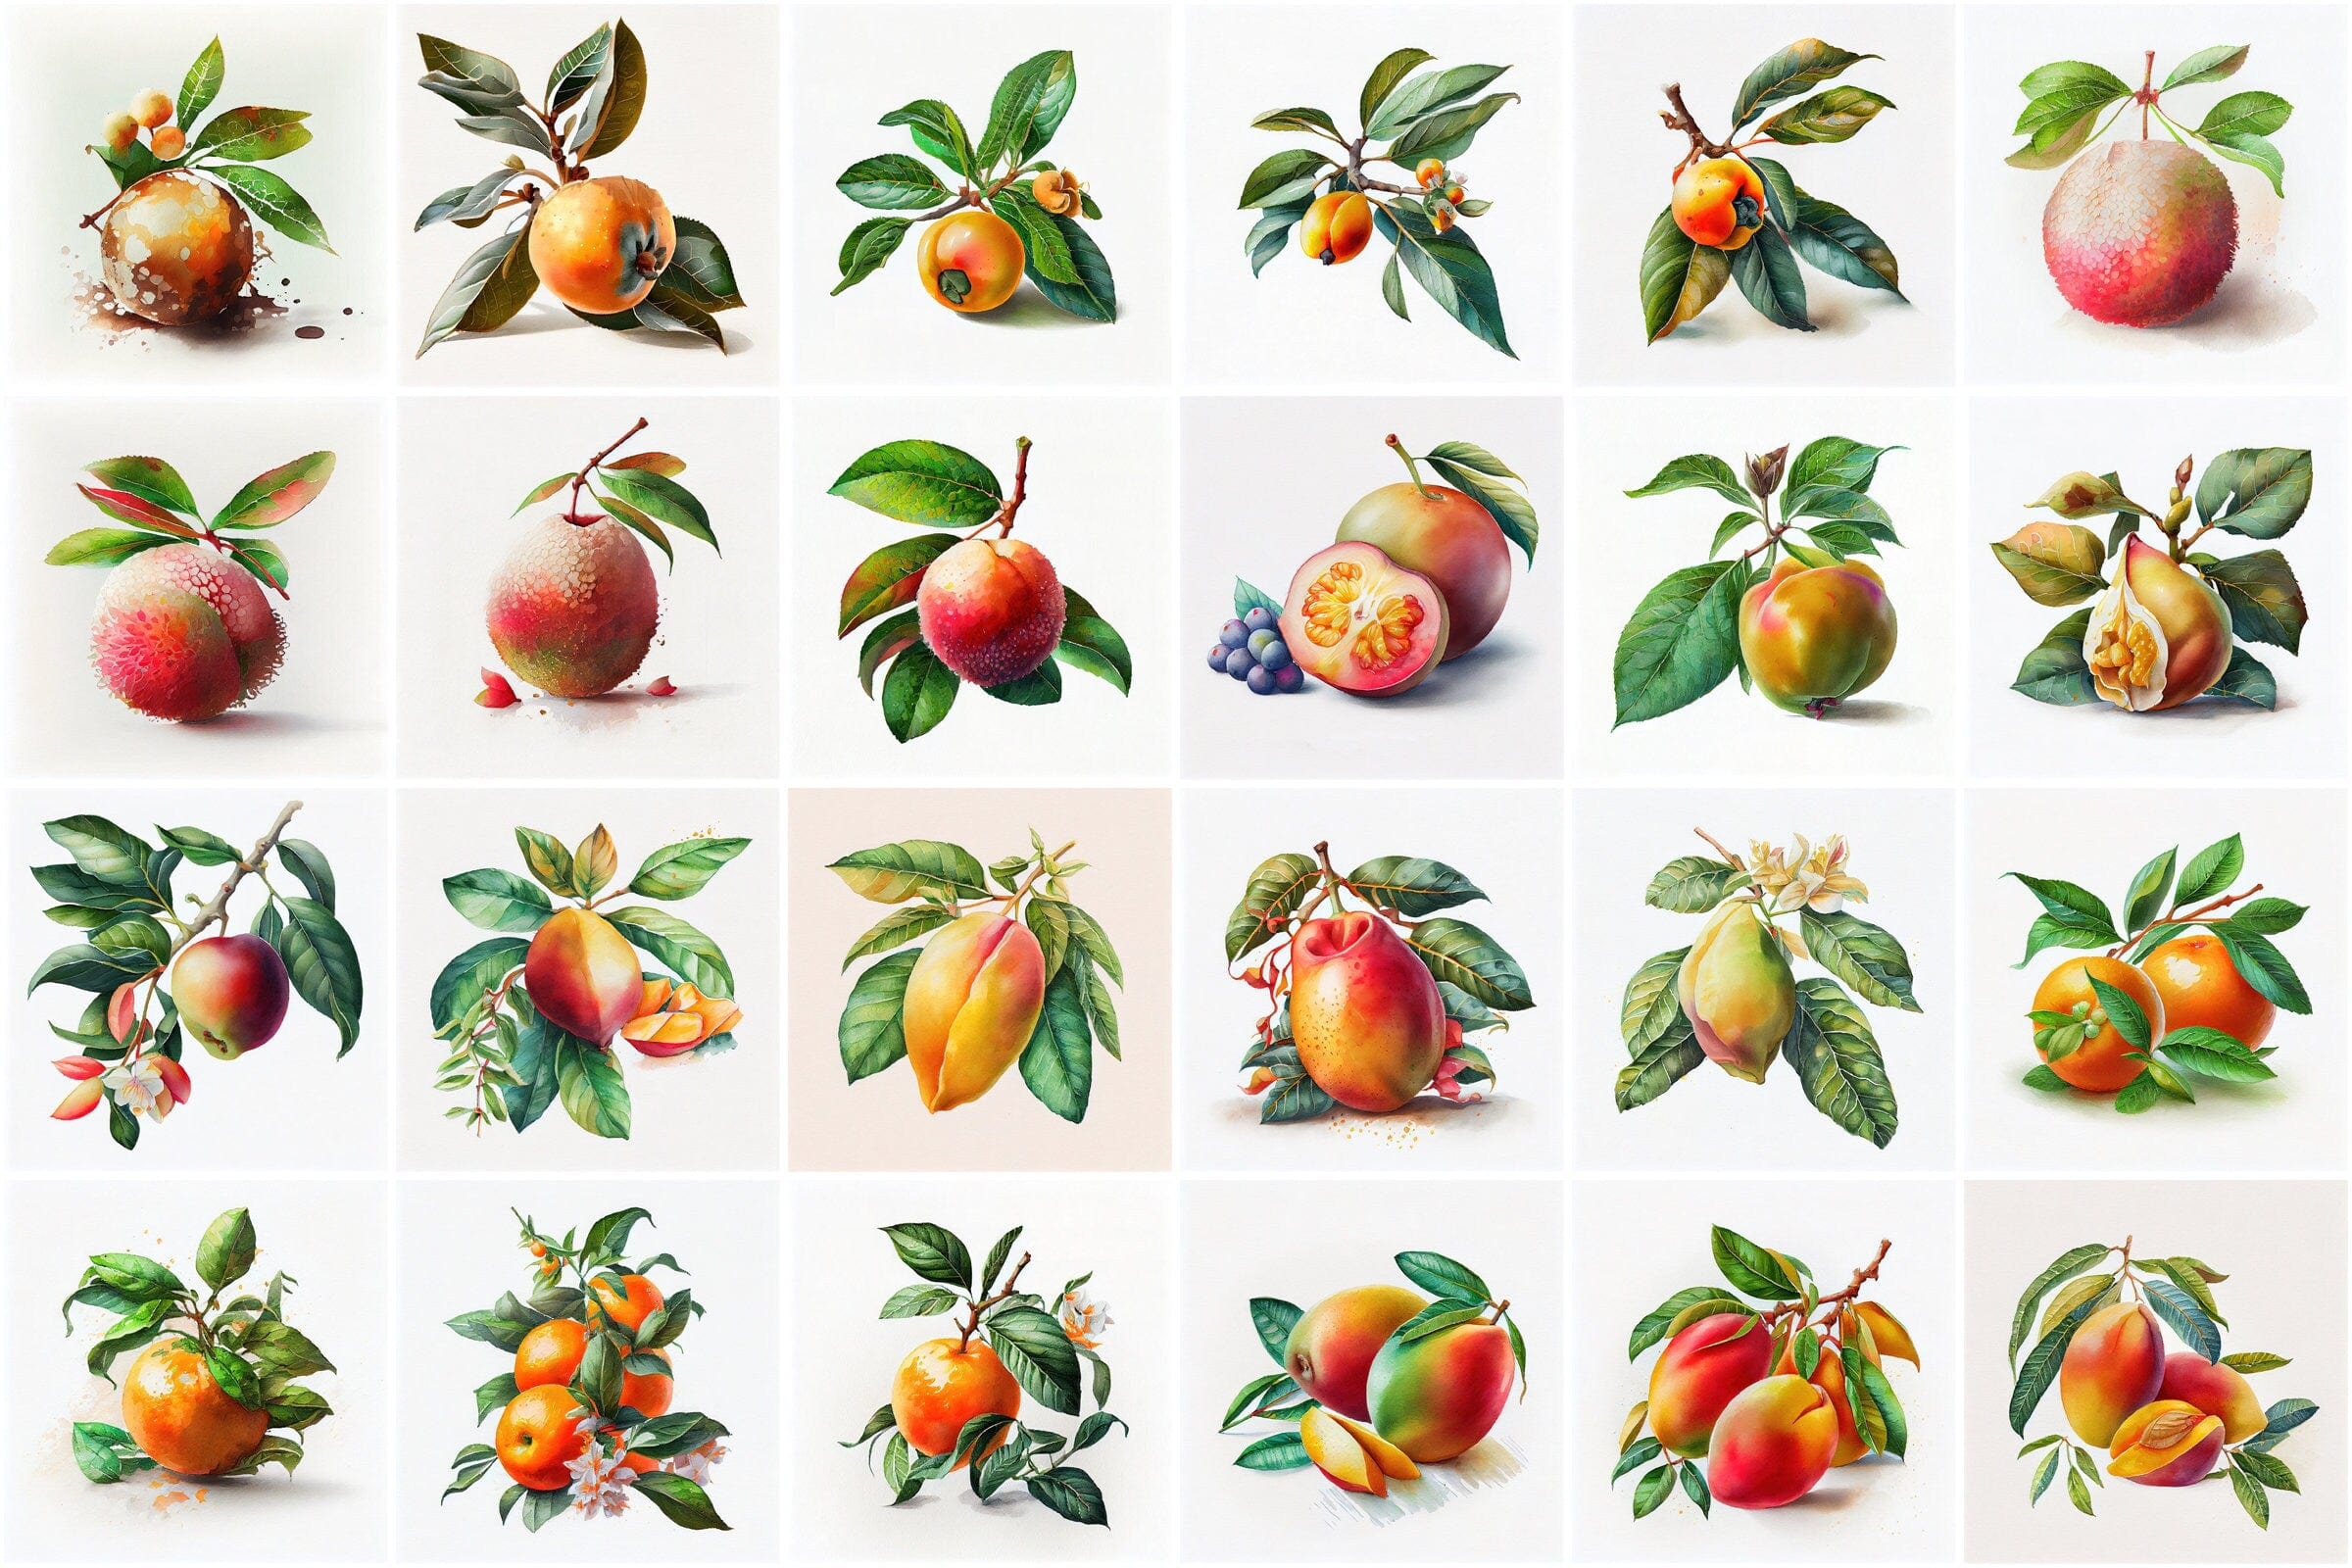 570 Vibrant Watercolor Fruits and Vegetables Bundle for Commercial Use - Fruits and Vegetables Watercolor Clipart for Recipe Cards and Print Digital Download Sumobundle